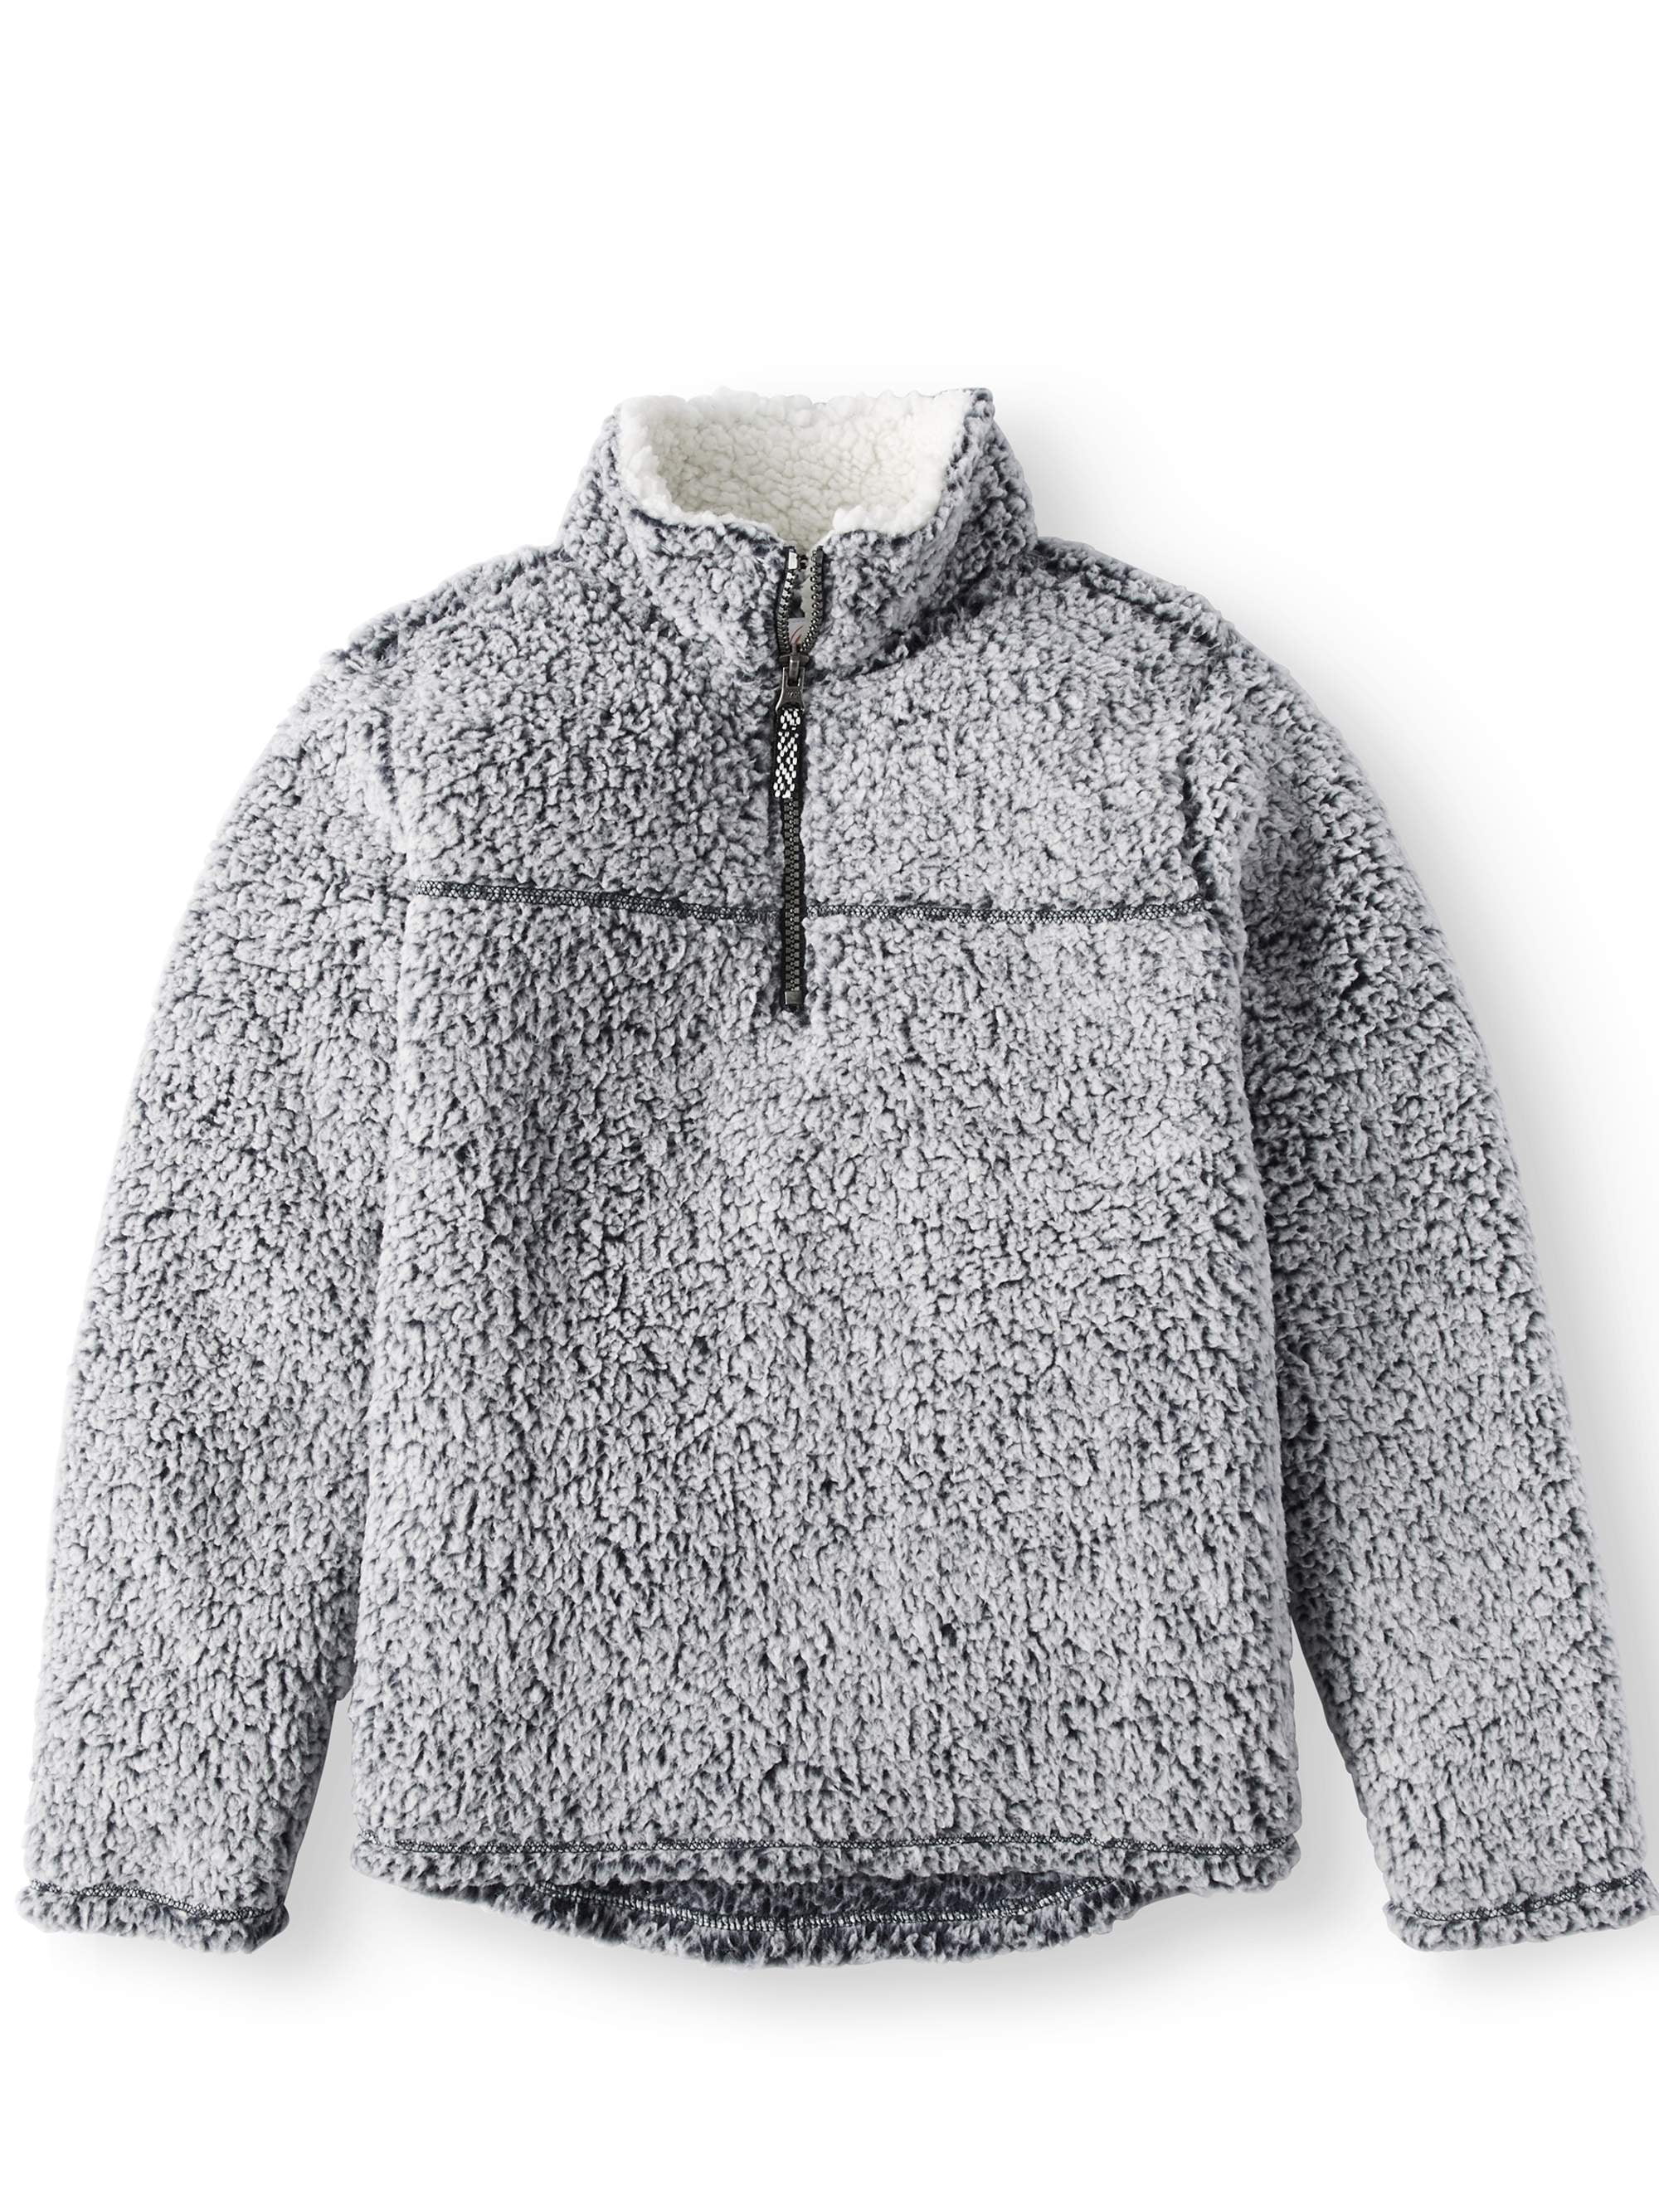 Stores That Sell Sherpa Pullovers on Sale, 59% OFF | www.vetyvet.com